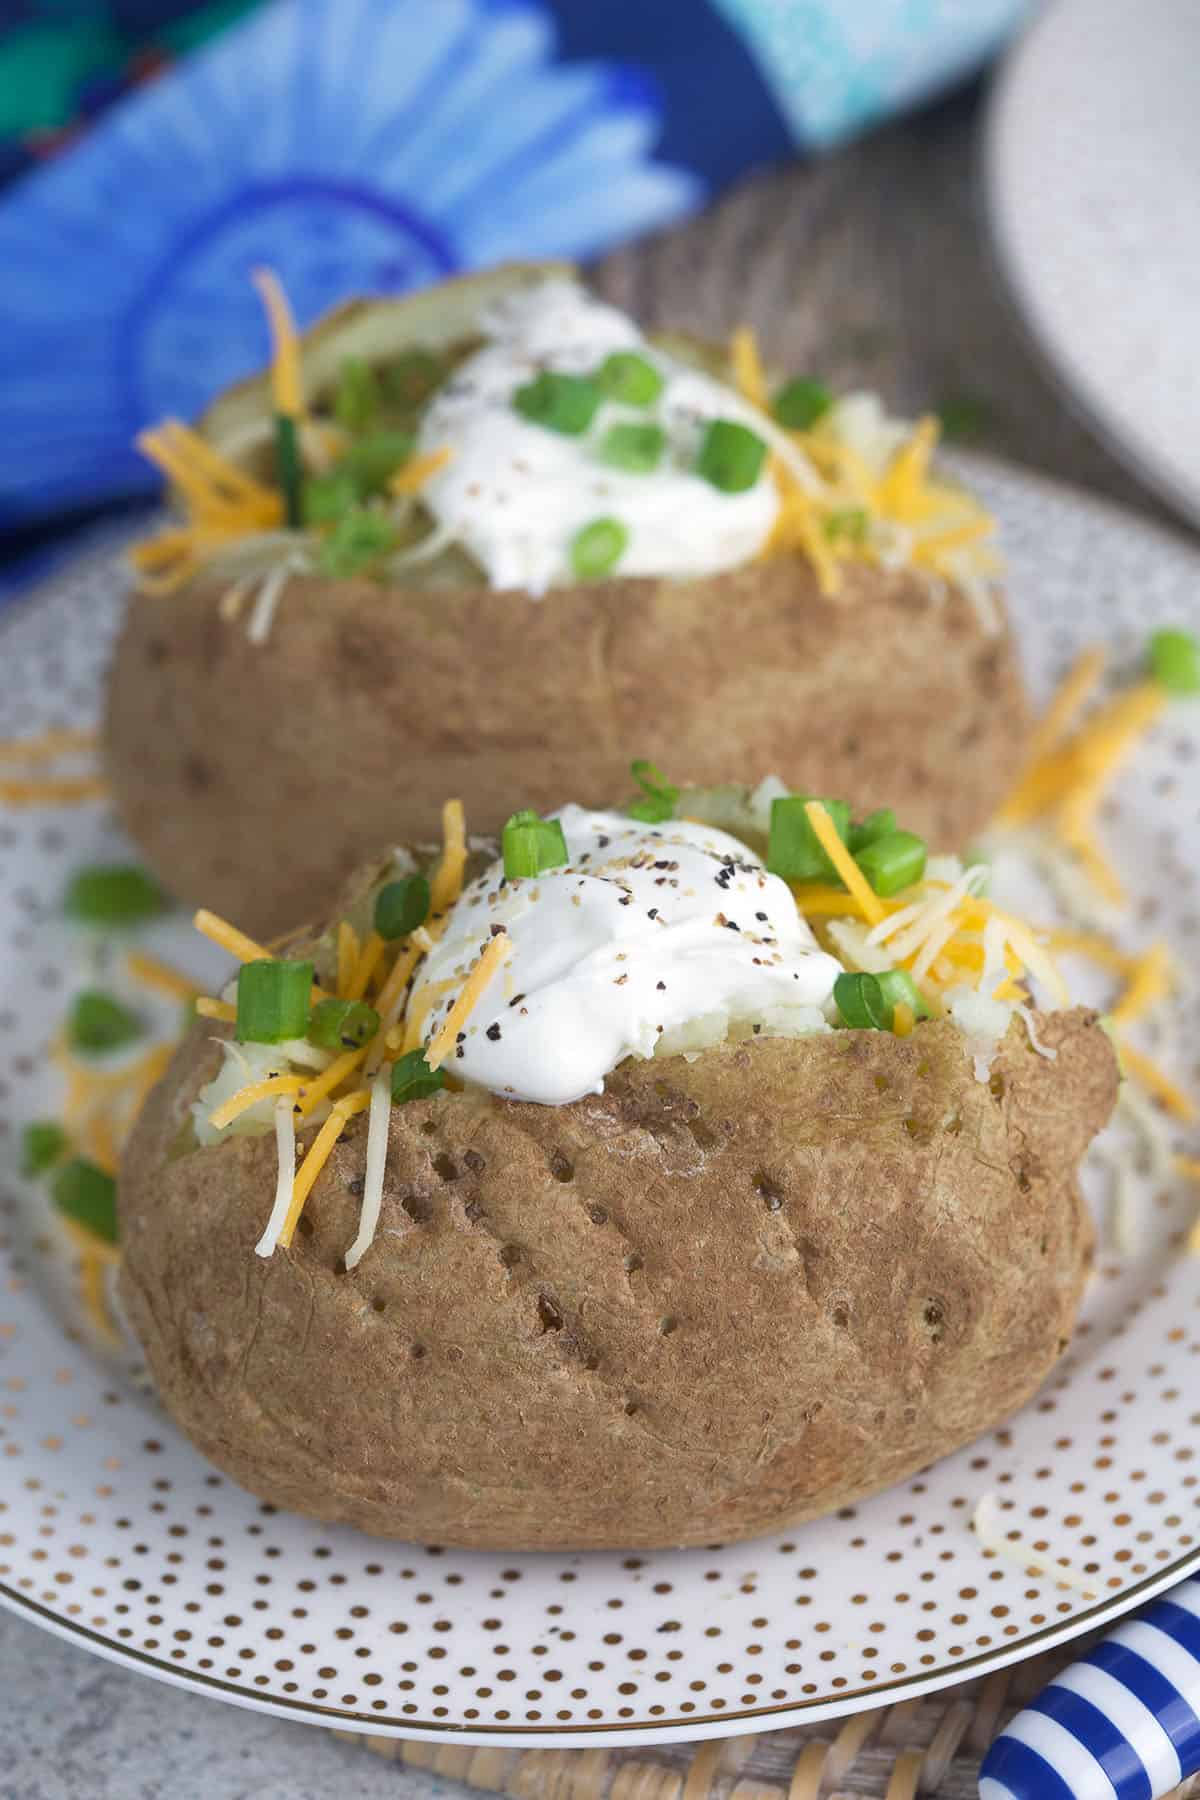 Two baked potatoes are placed on a spotted plate.